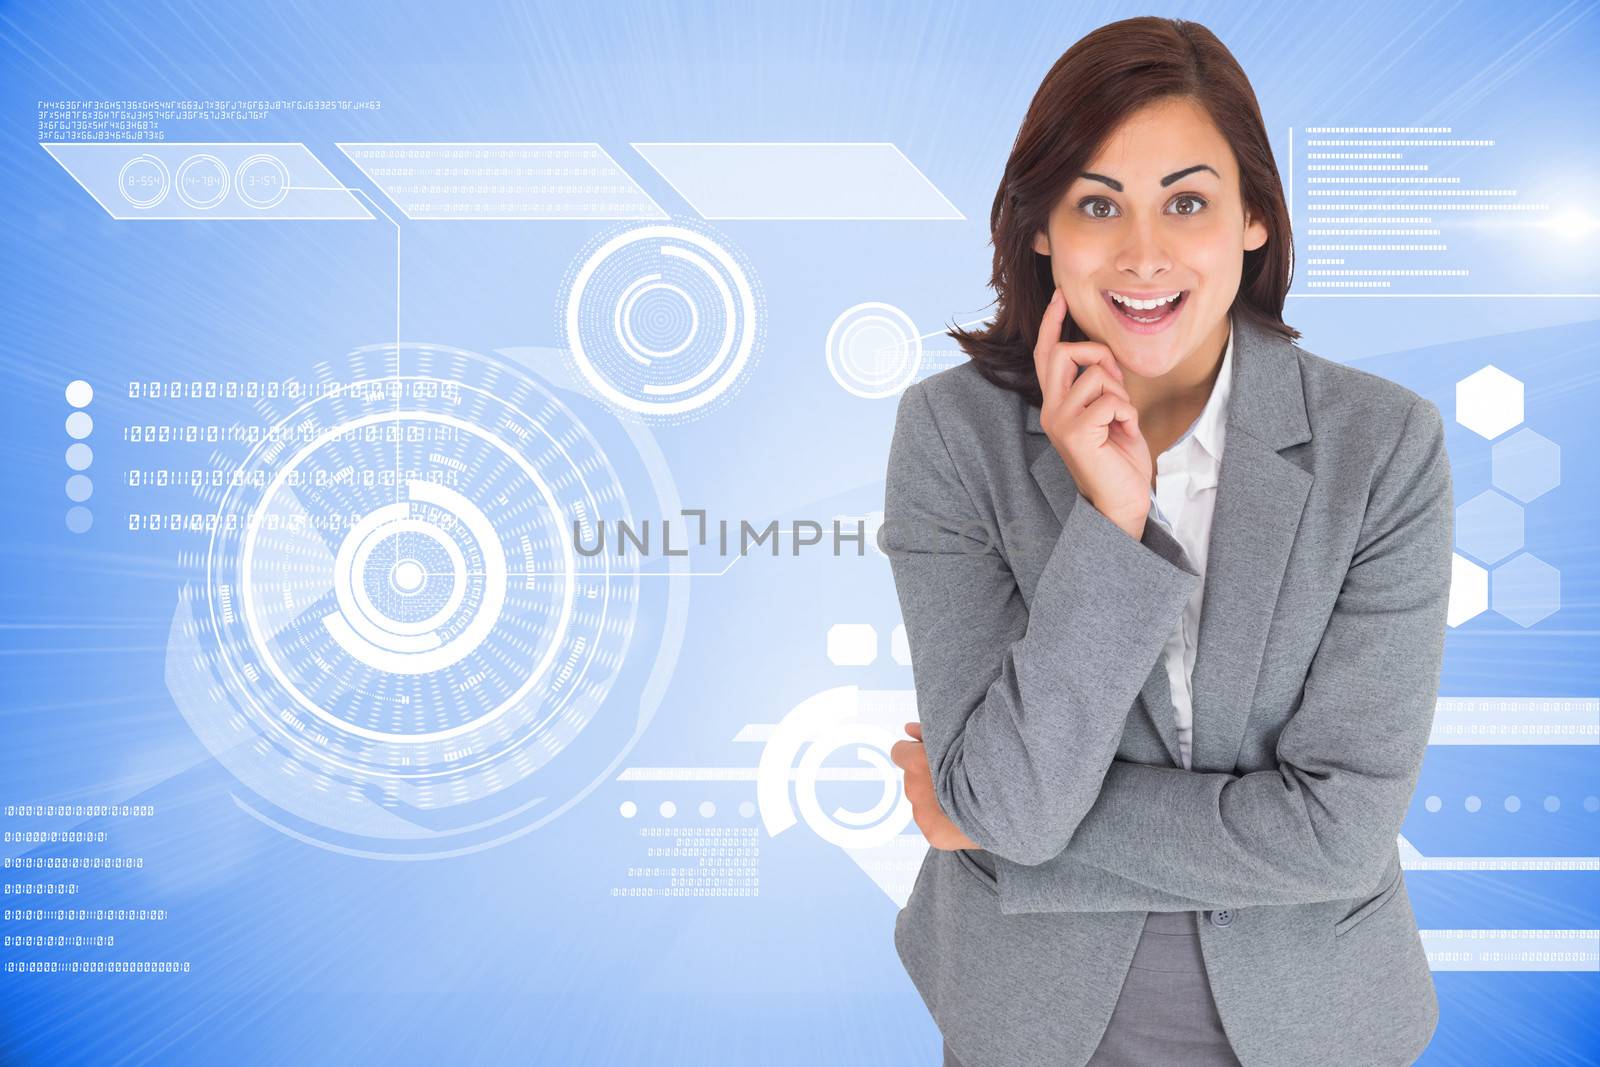 Smiling thoughtful businesswoman against futuristic technology interface